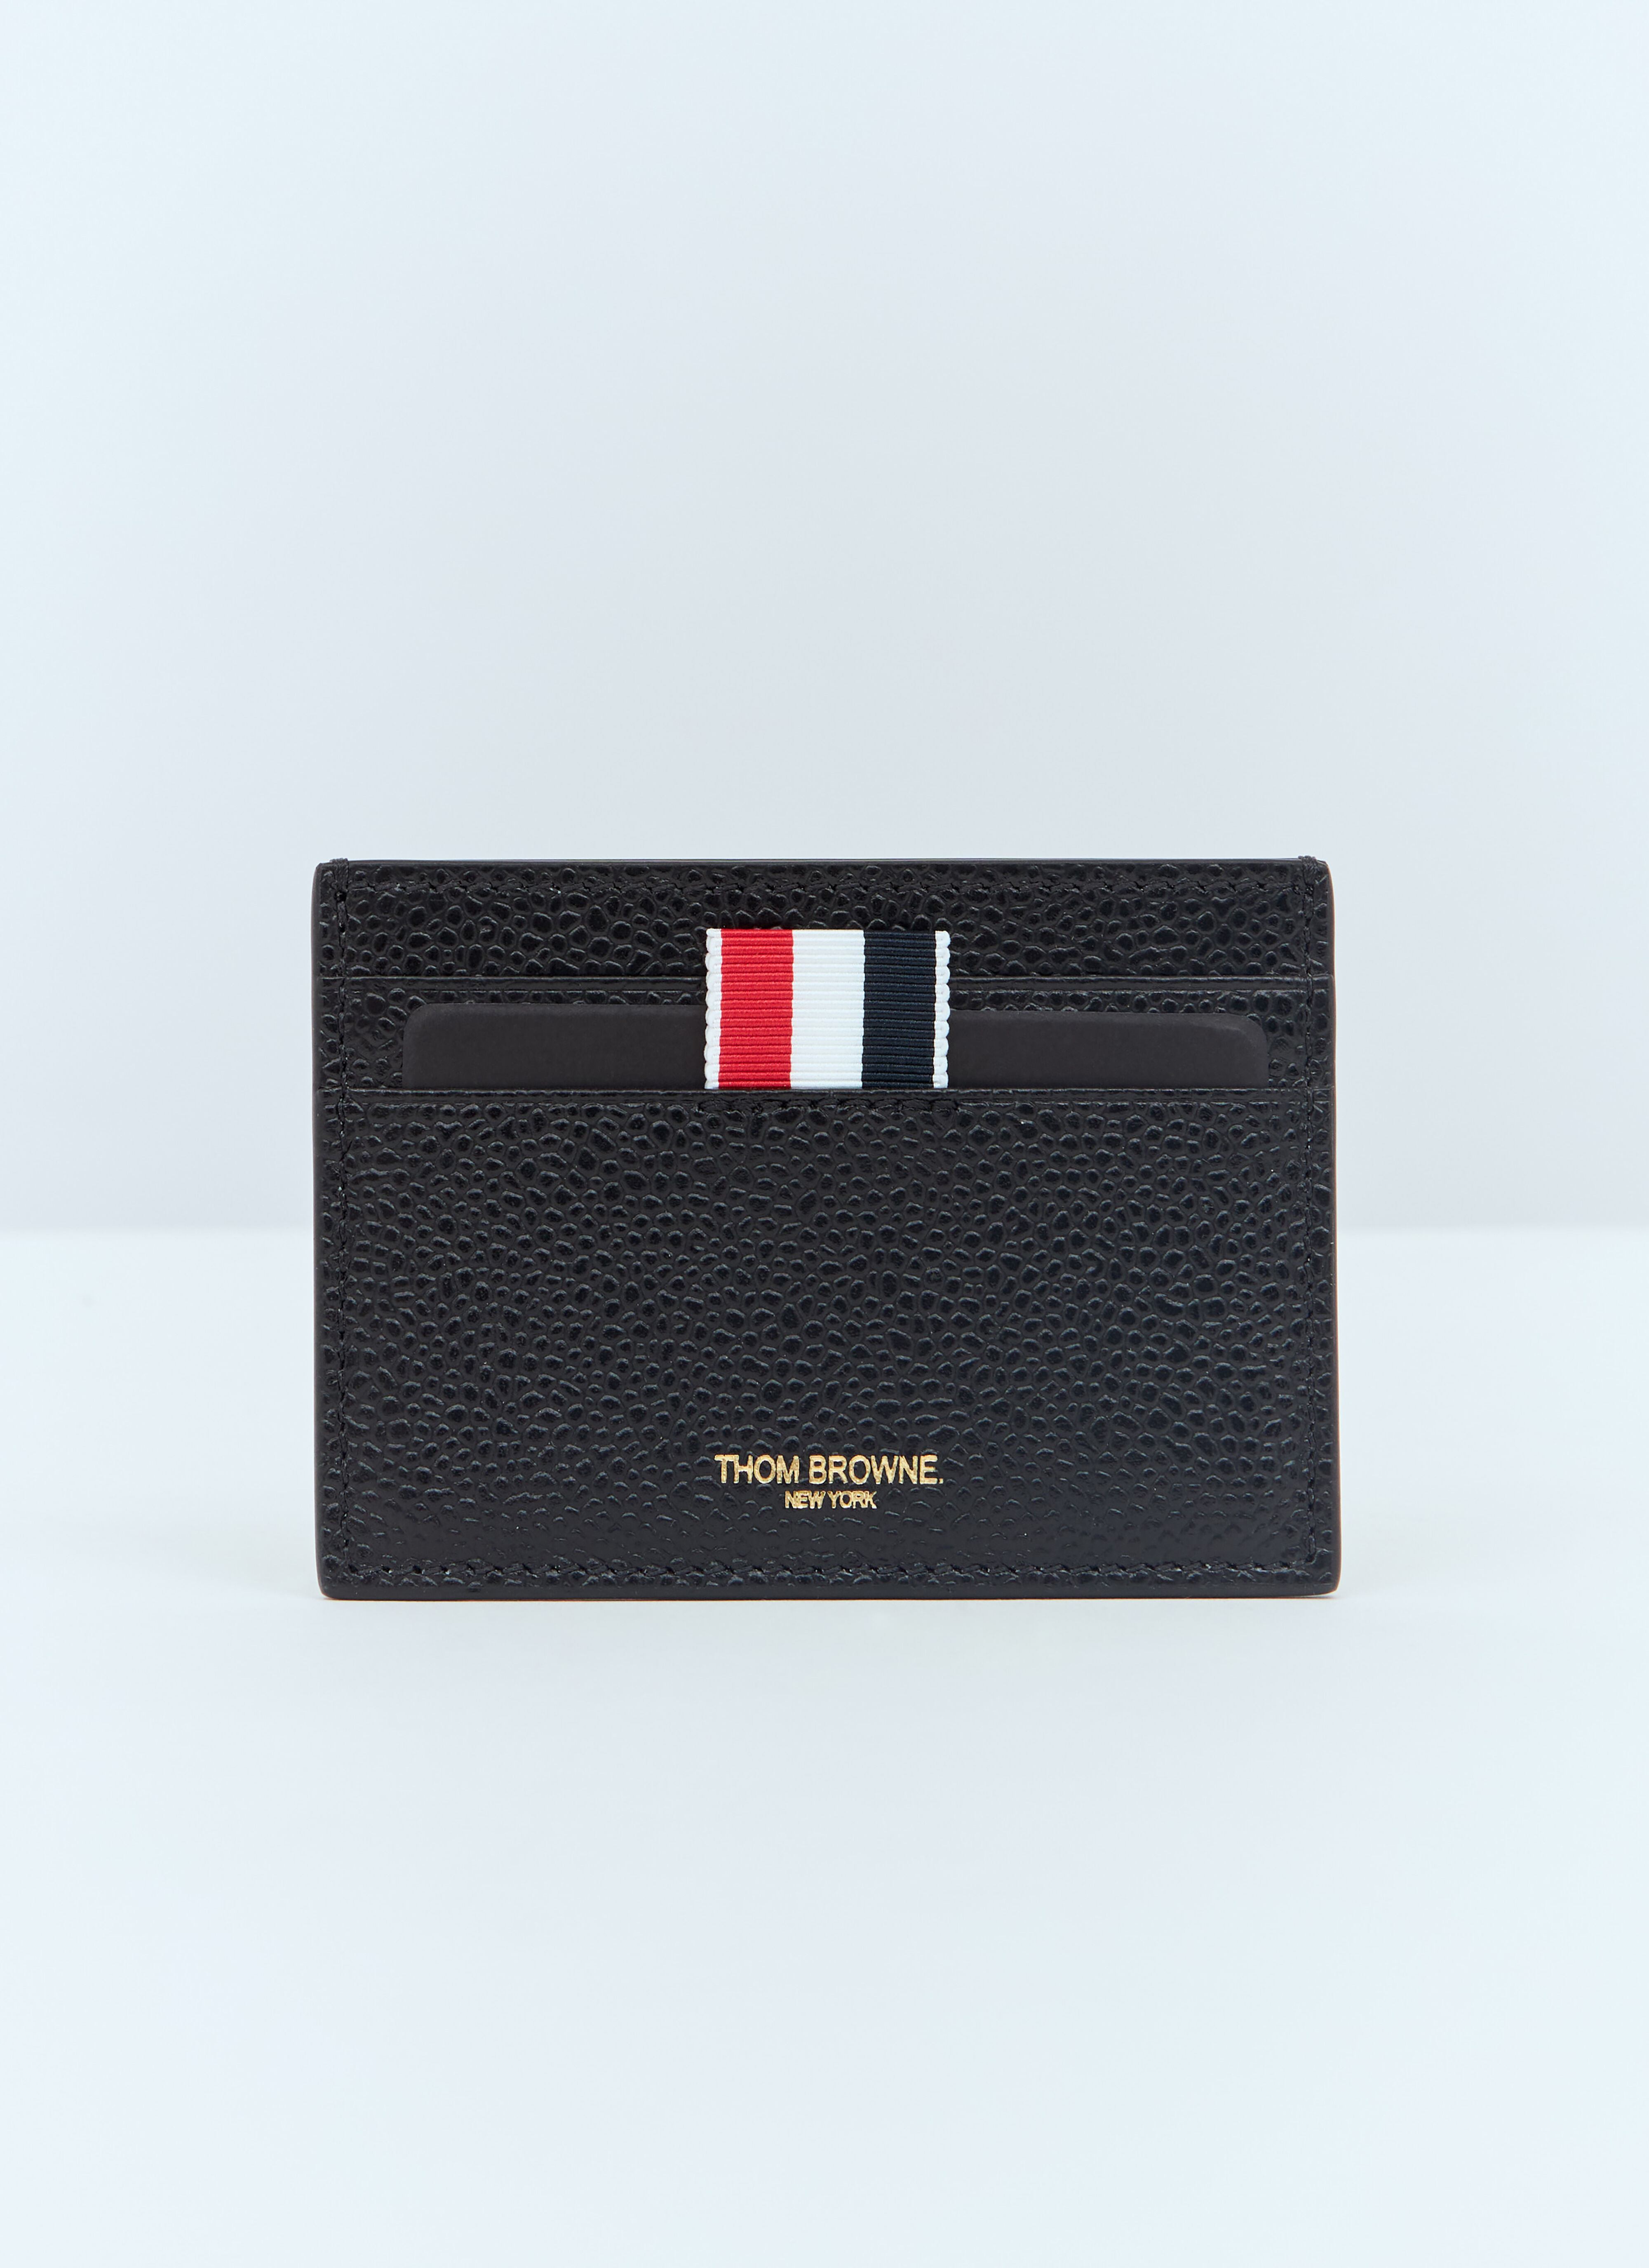 Thom Browne Leather And Canvas Cardholder Grey thb0156006